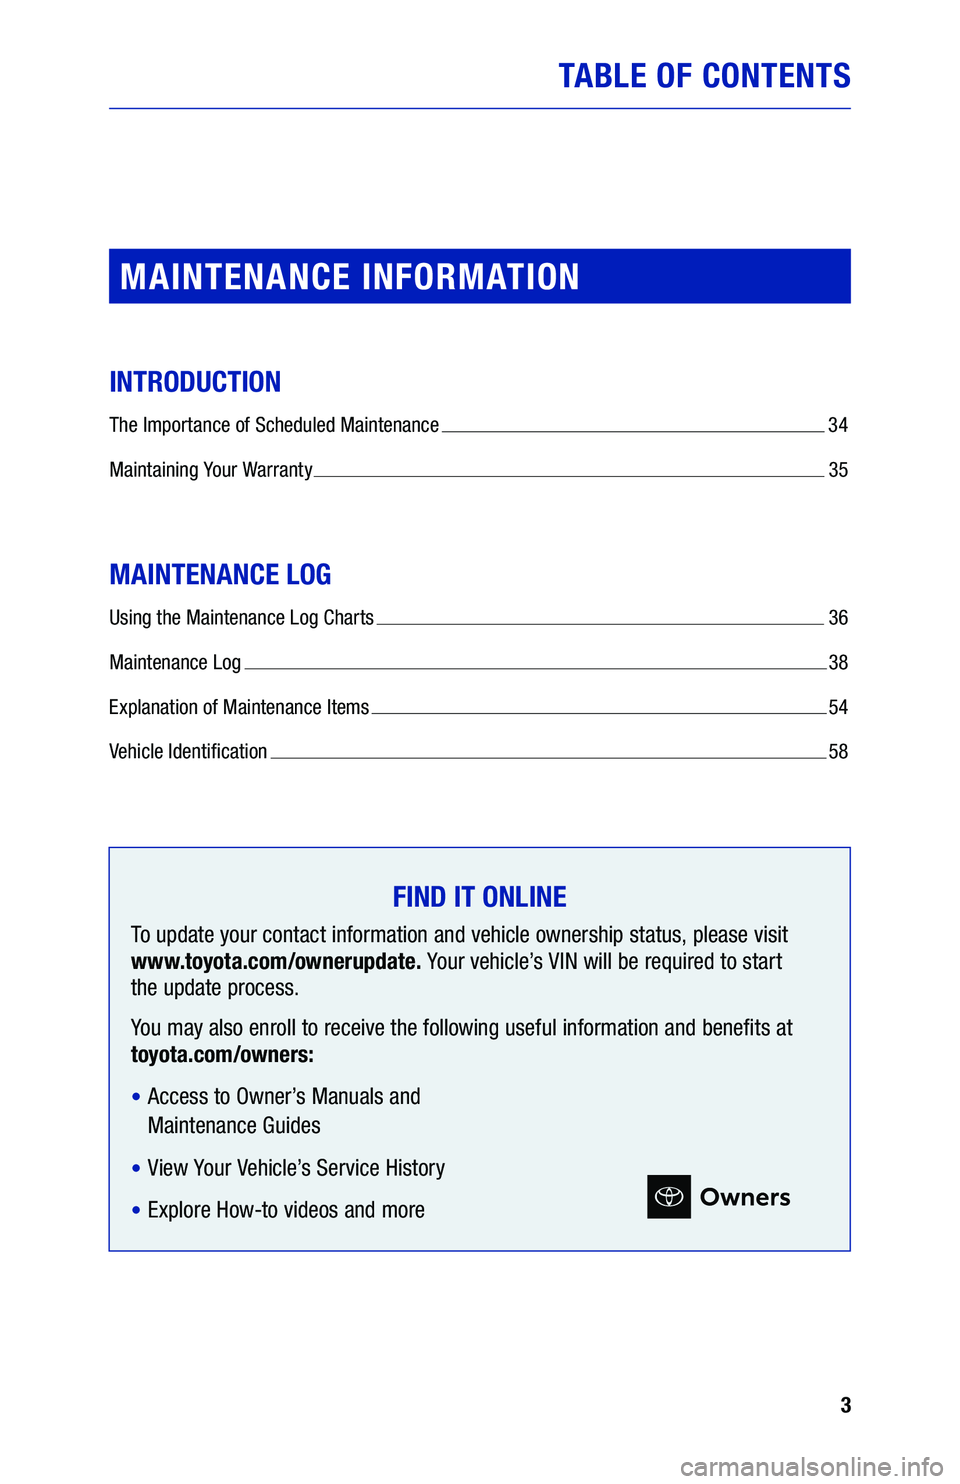 TOYOTA PRIUS 2020  Warranties & Maintenance Guides (in English) 3
TABLE OF CONTENTS
MAINTENANCE INFORMATION
INTRODUCTION
The Importance of Scheduled Maintenance  34
Maintaining Your Warranty  35
MAINTENANCE LOG
Using the Maintenance Log Charts  36
Maintenance Log 